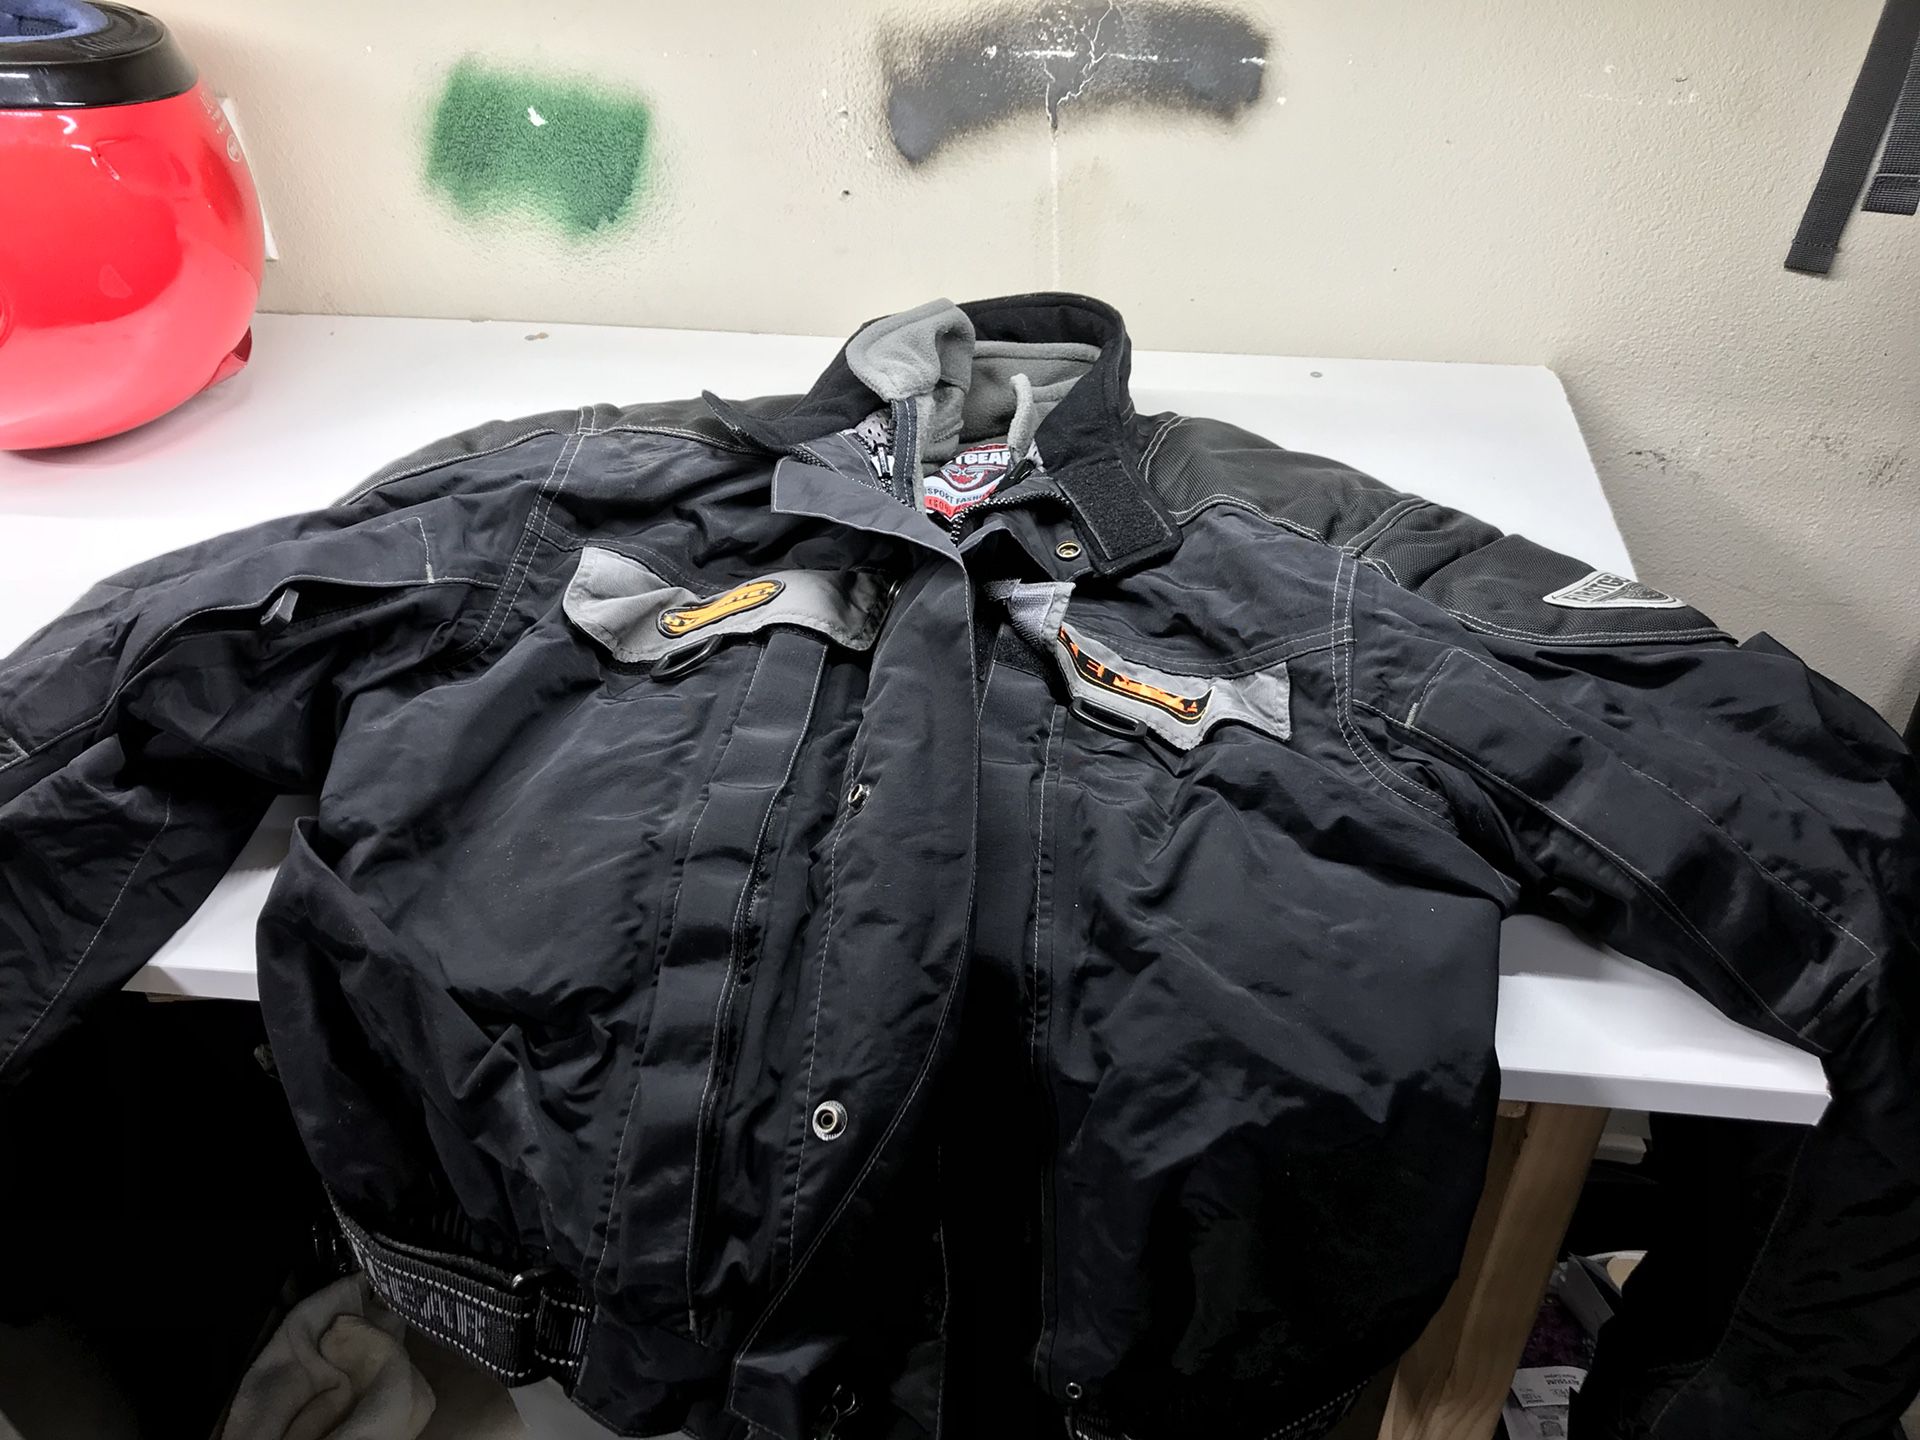 First gear hypertext Motorcycle Jacket Large, with 2 Aria Helmets